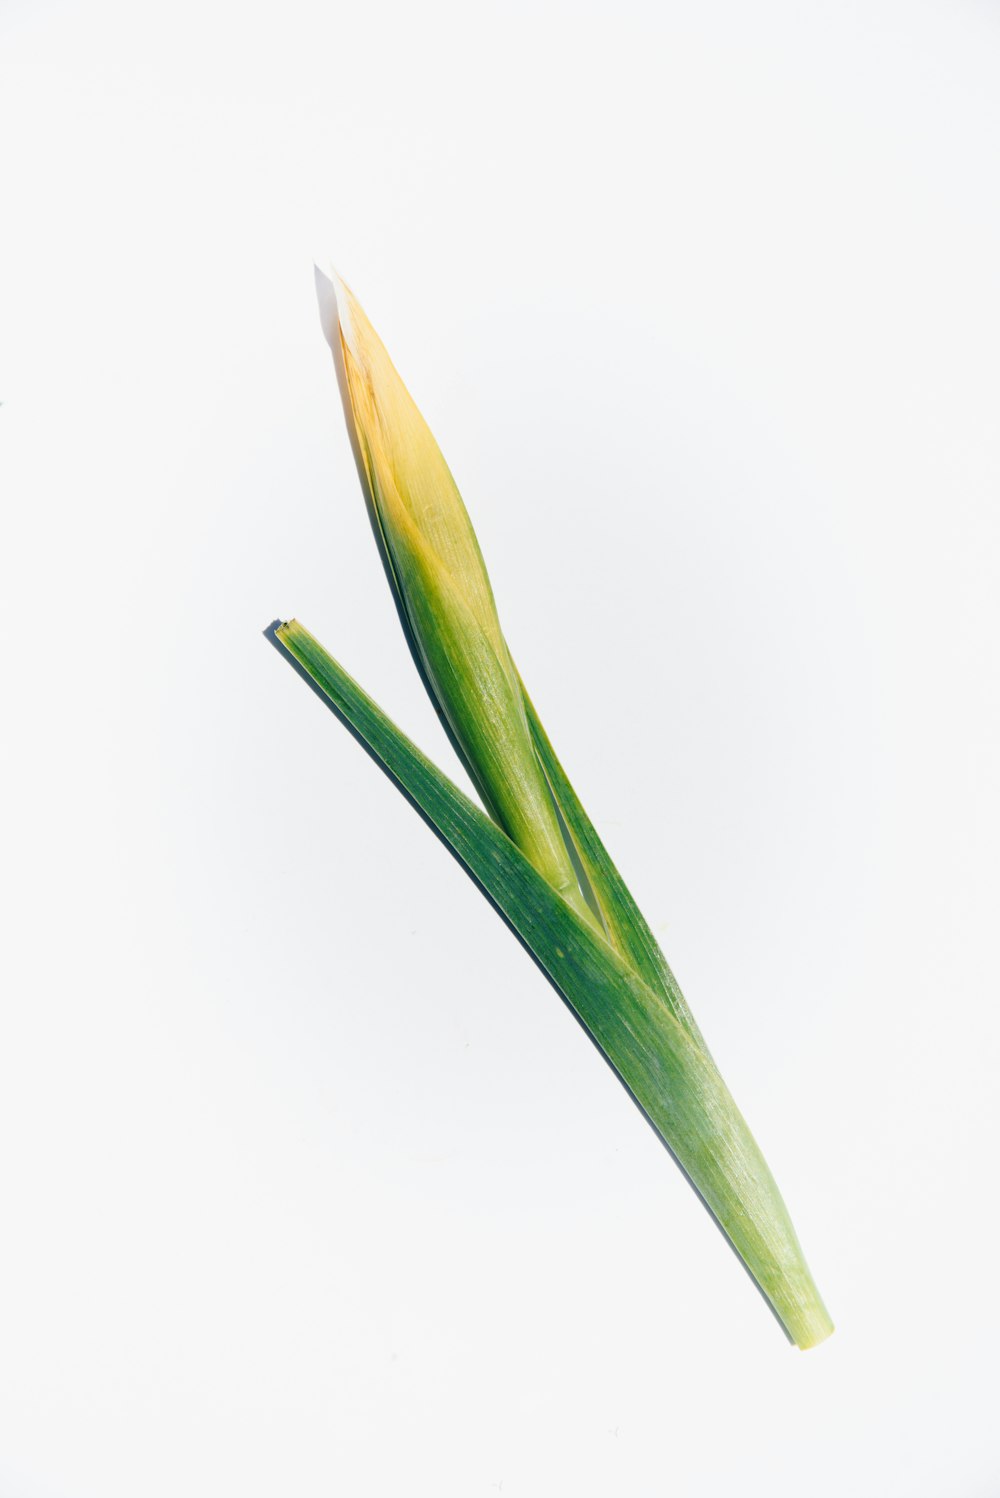 a close up of two green leaves on a white background